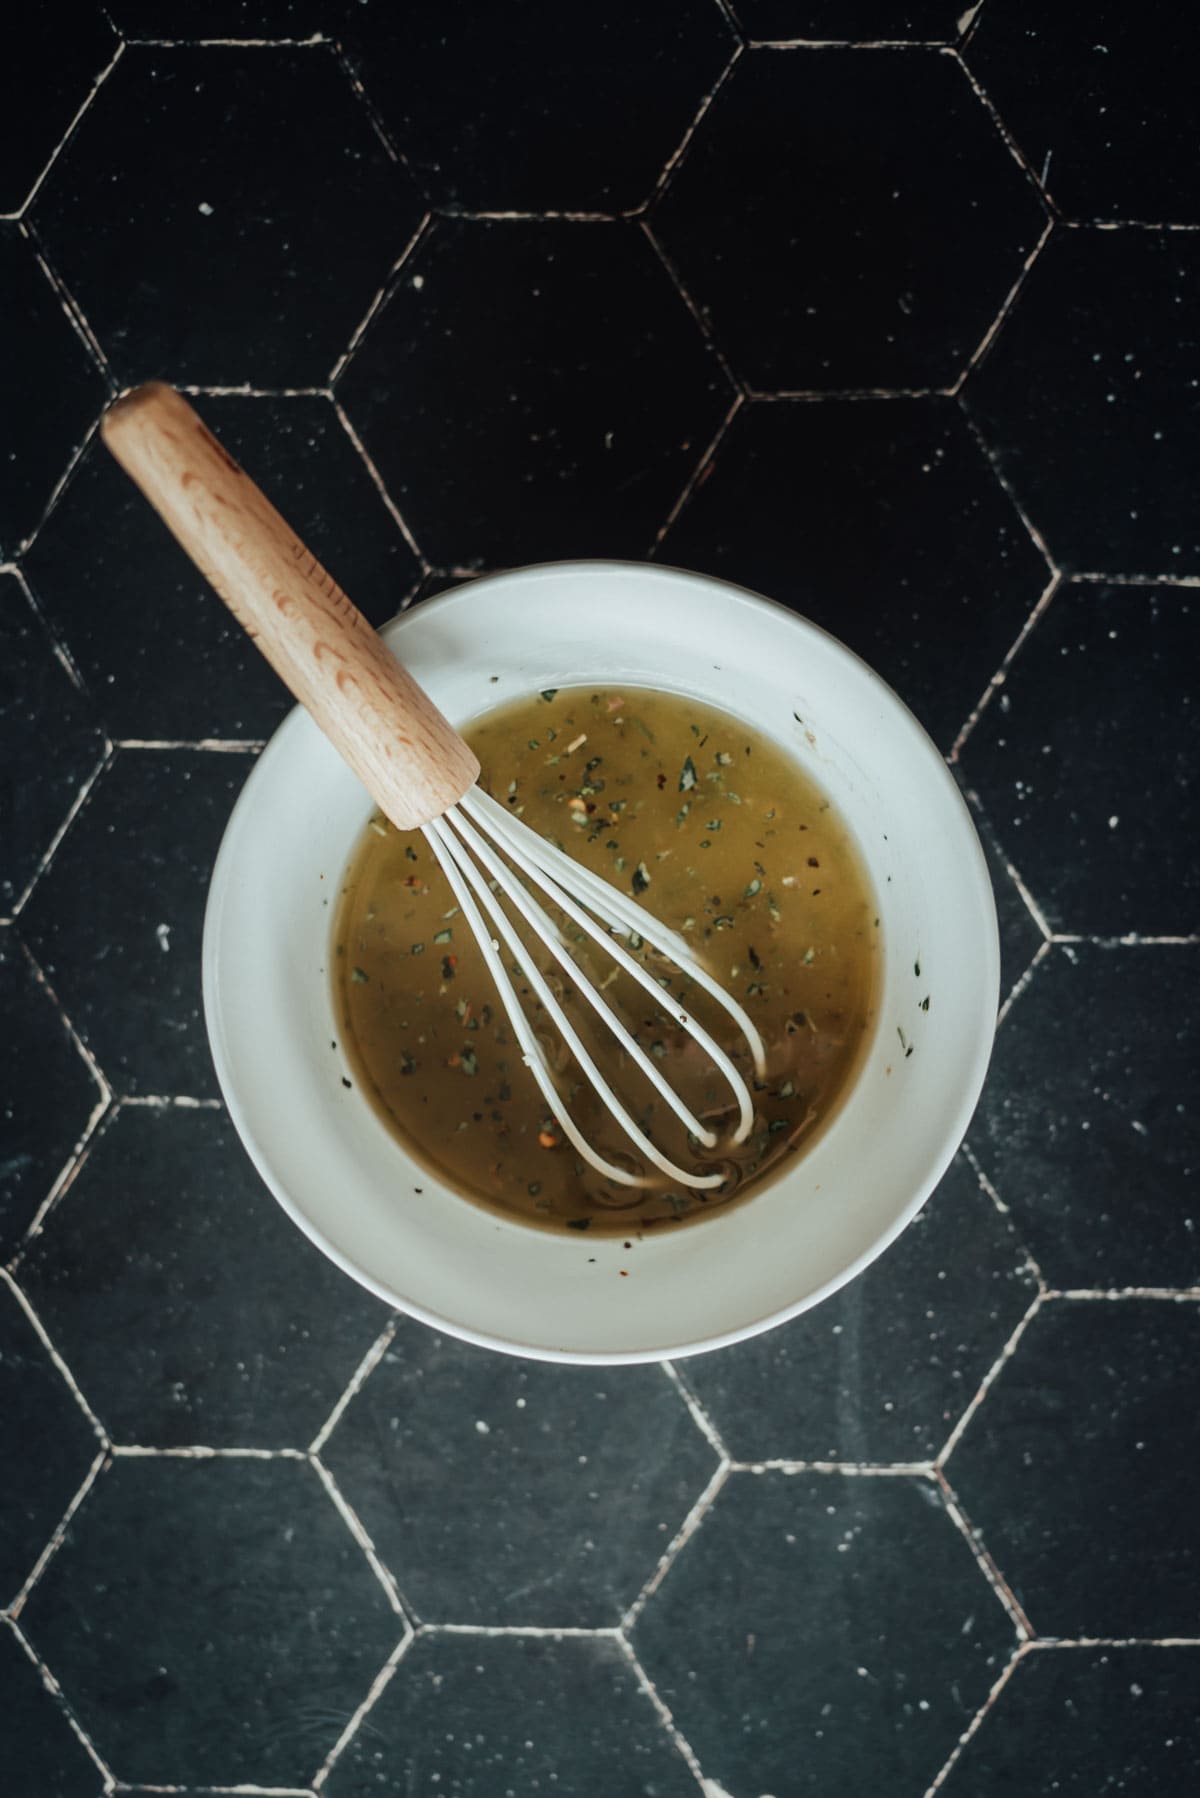 A bowl of homemade italian dressing with herbs, being mixed with a whisk, sits on a black surface.